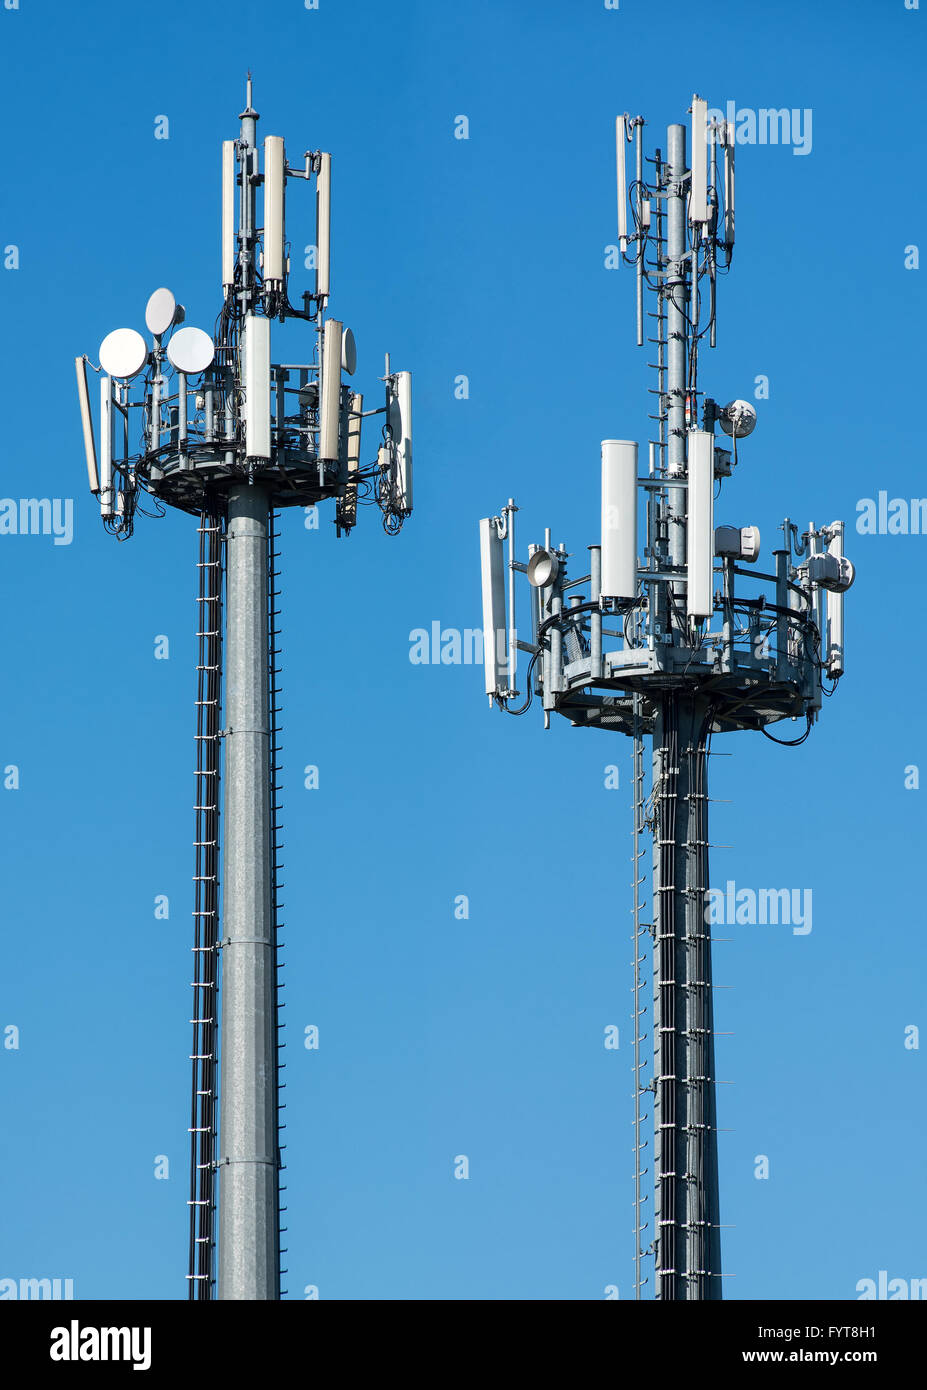 Two telecommunications towers with satellite dishes and antennae fro transmitting and receiving broadcasting signals Stock Photo